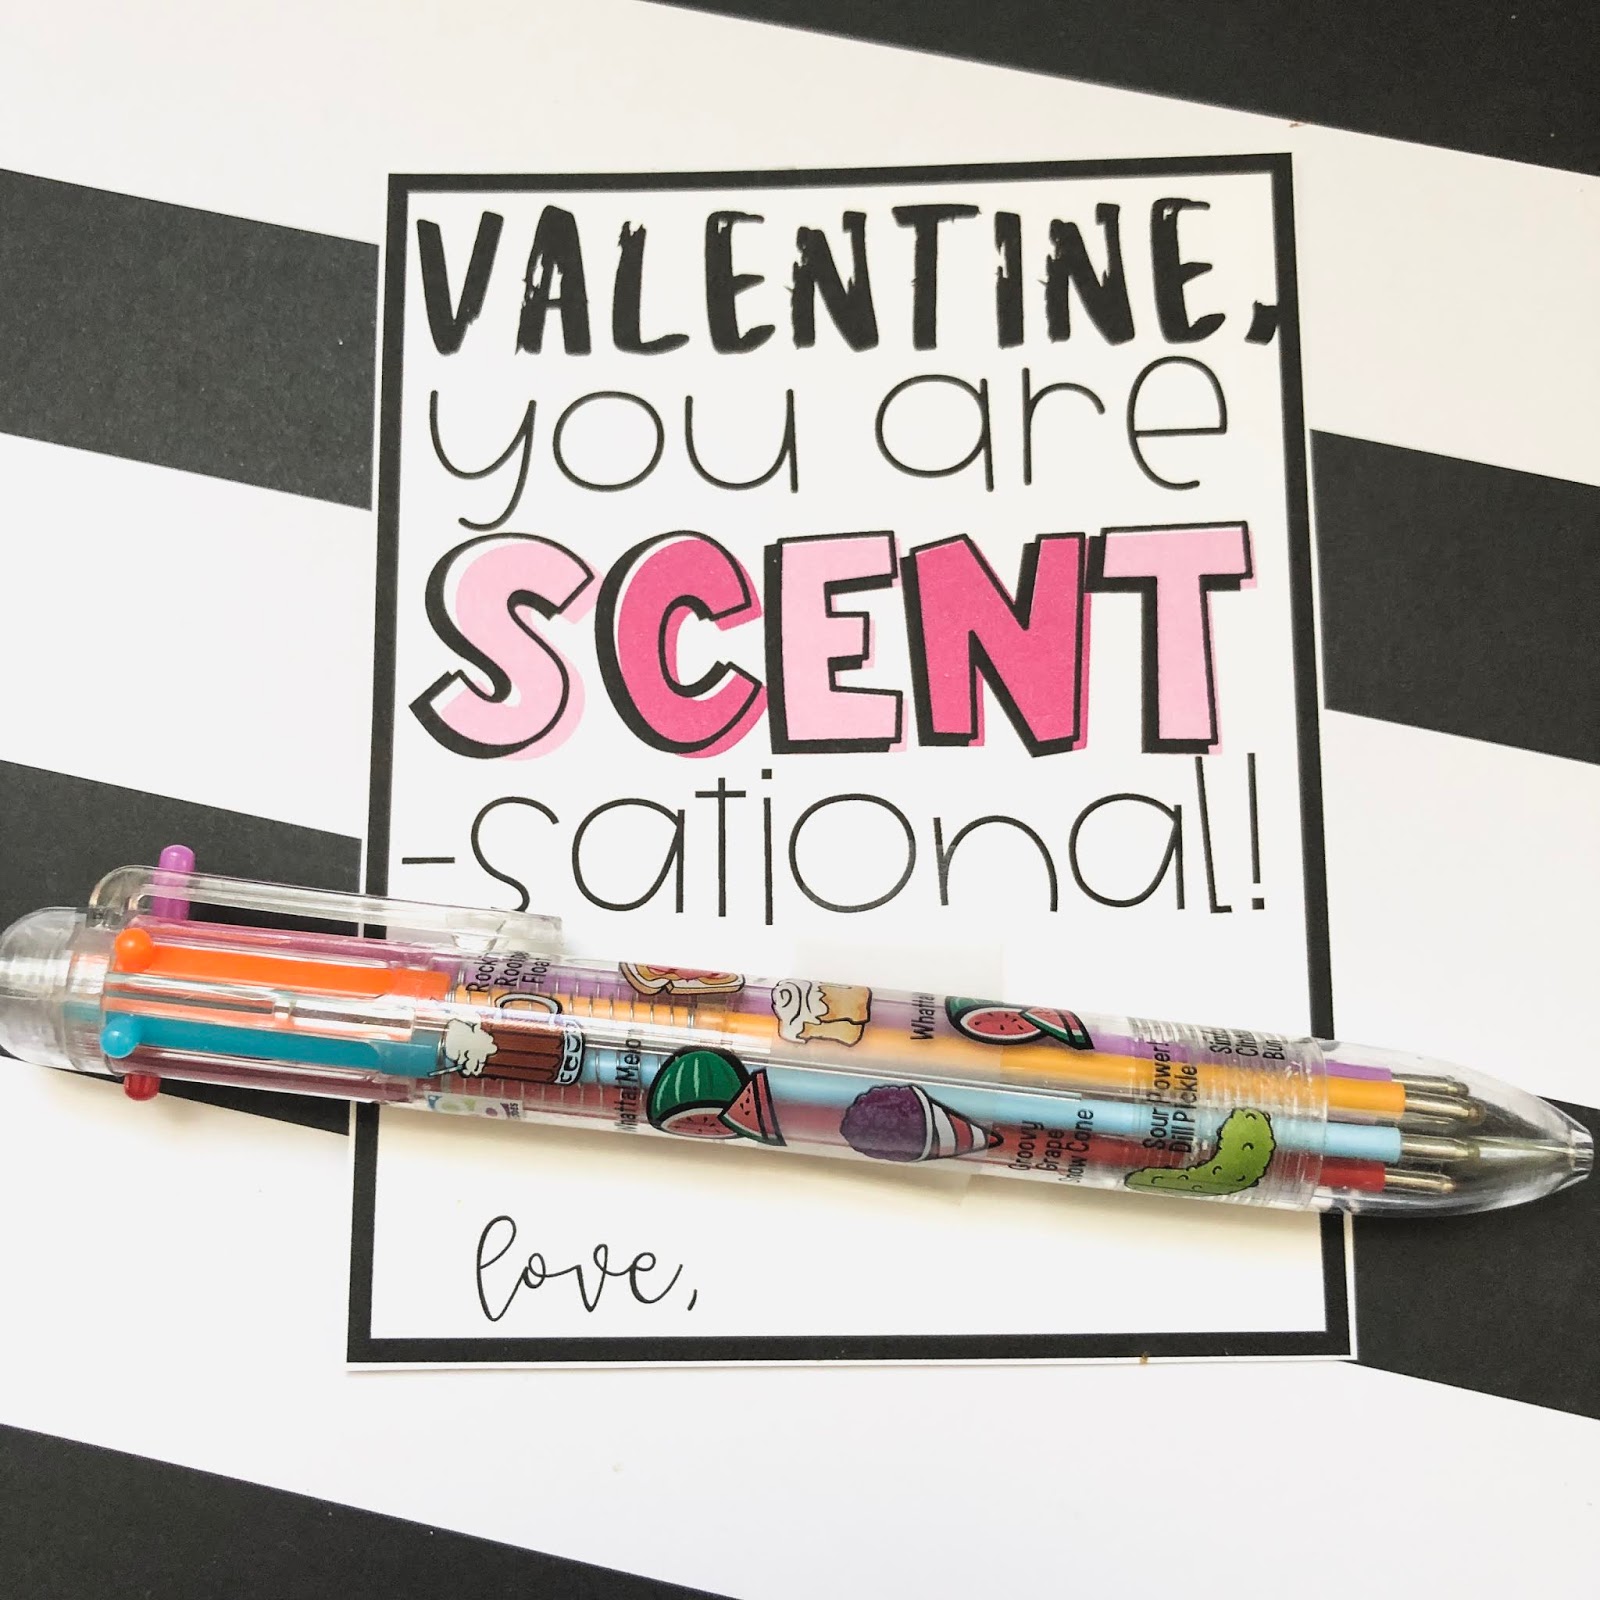 10 DIY Valentine's Day Gifts for Teachers that Kids can Make